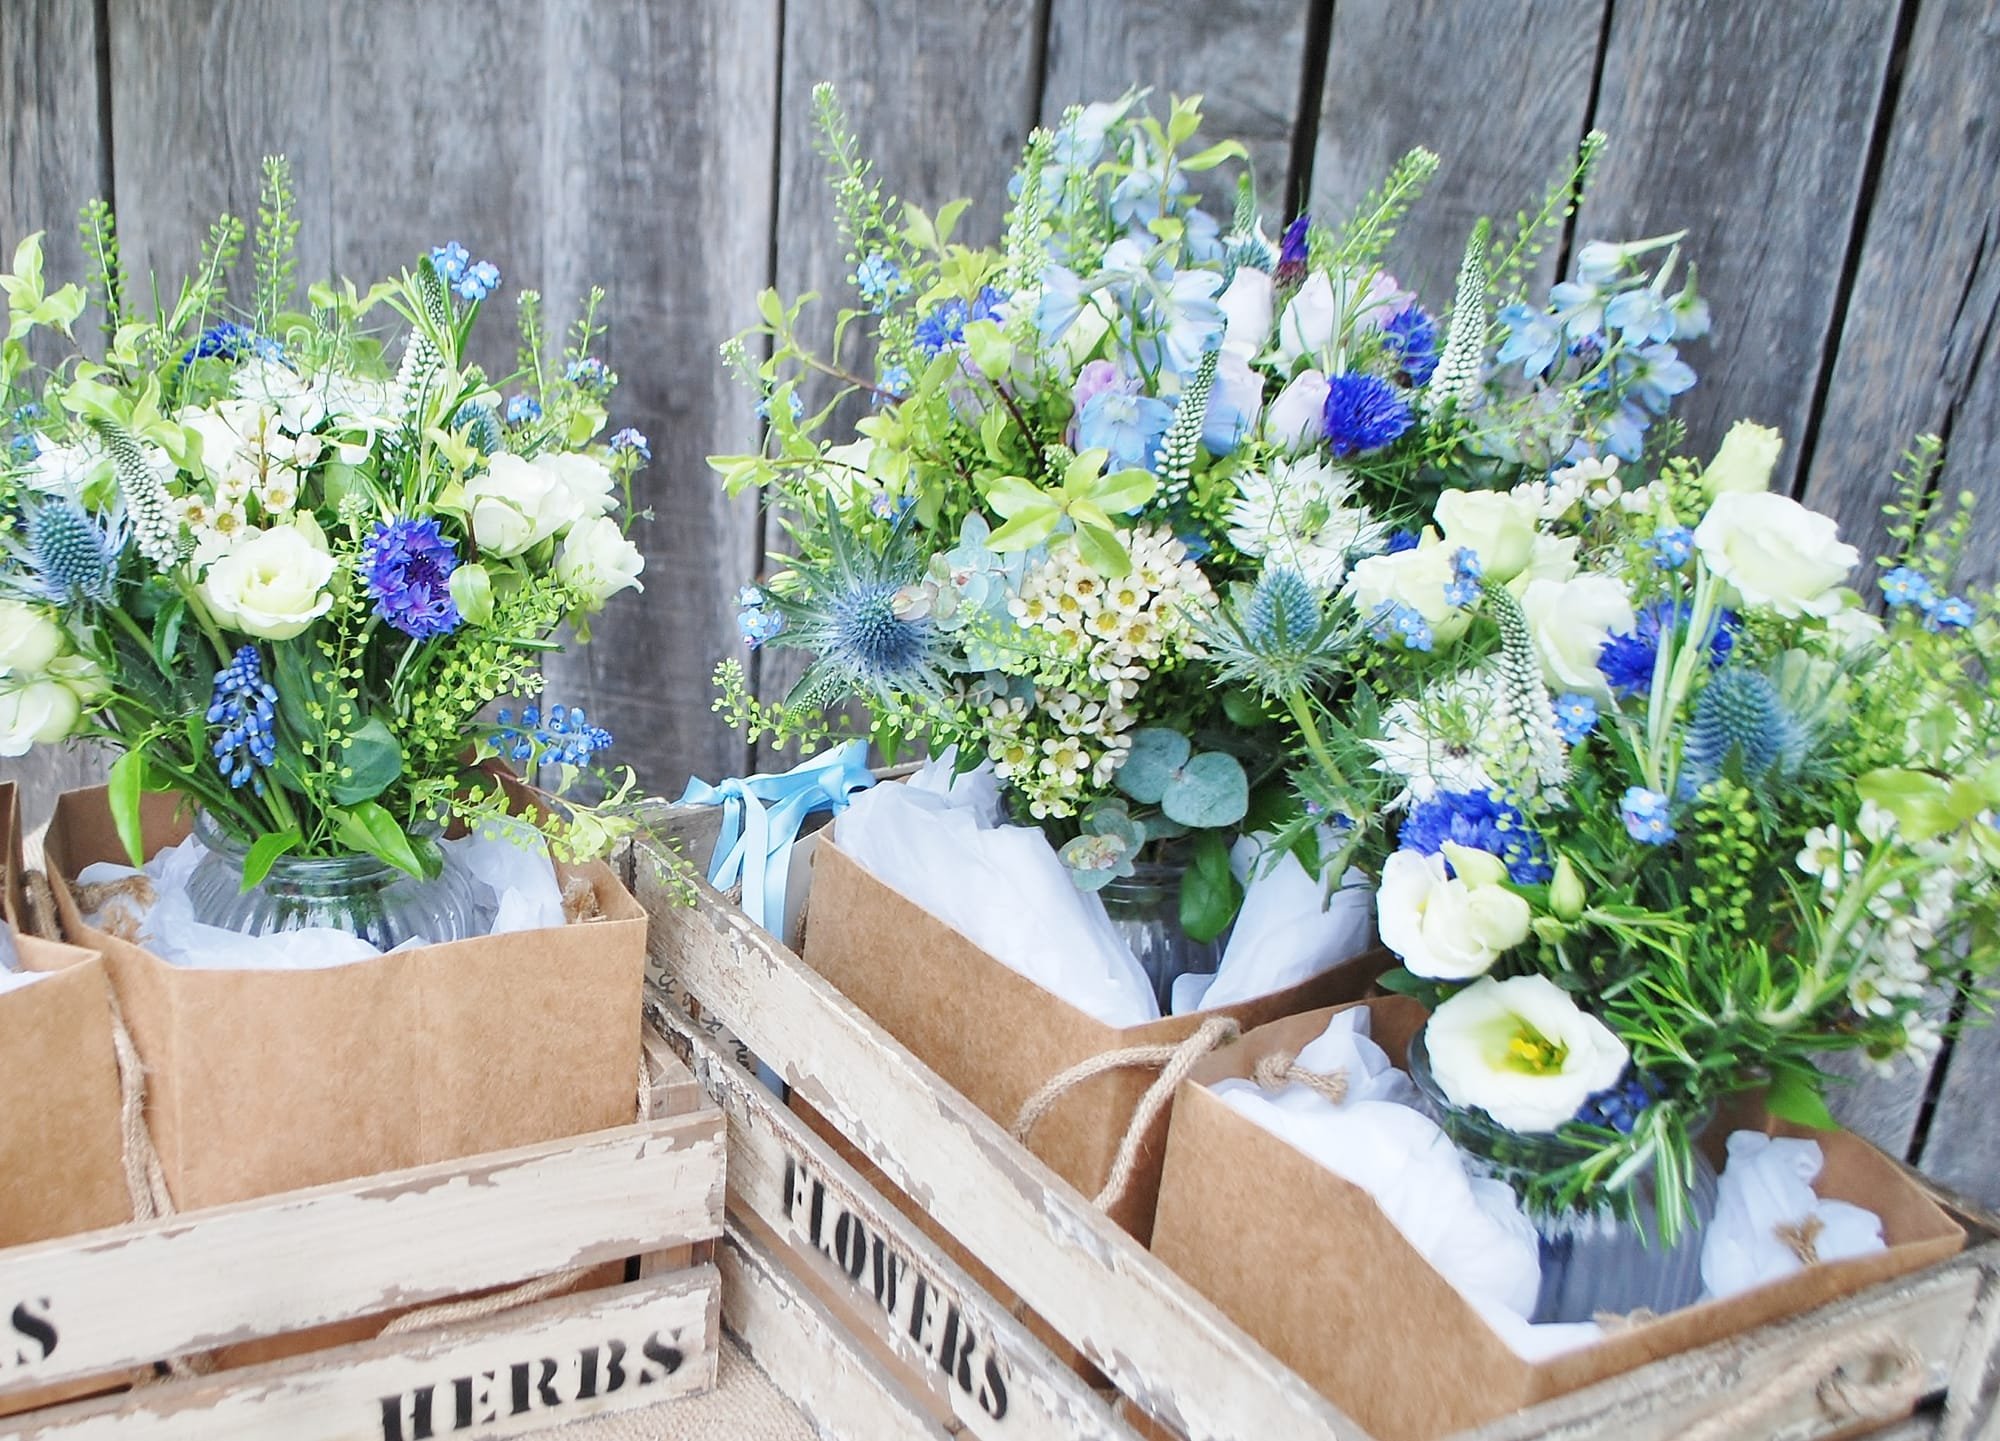 Bridal party bouquets waiting for delivery.